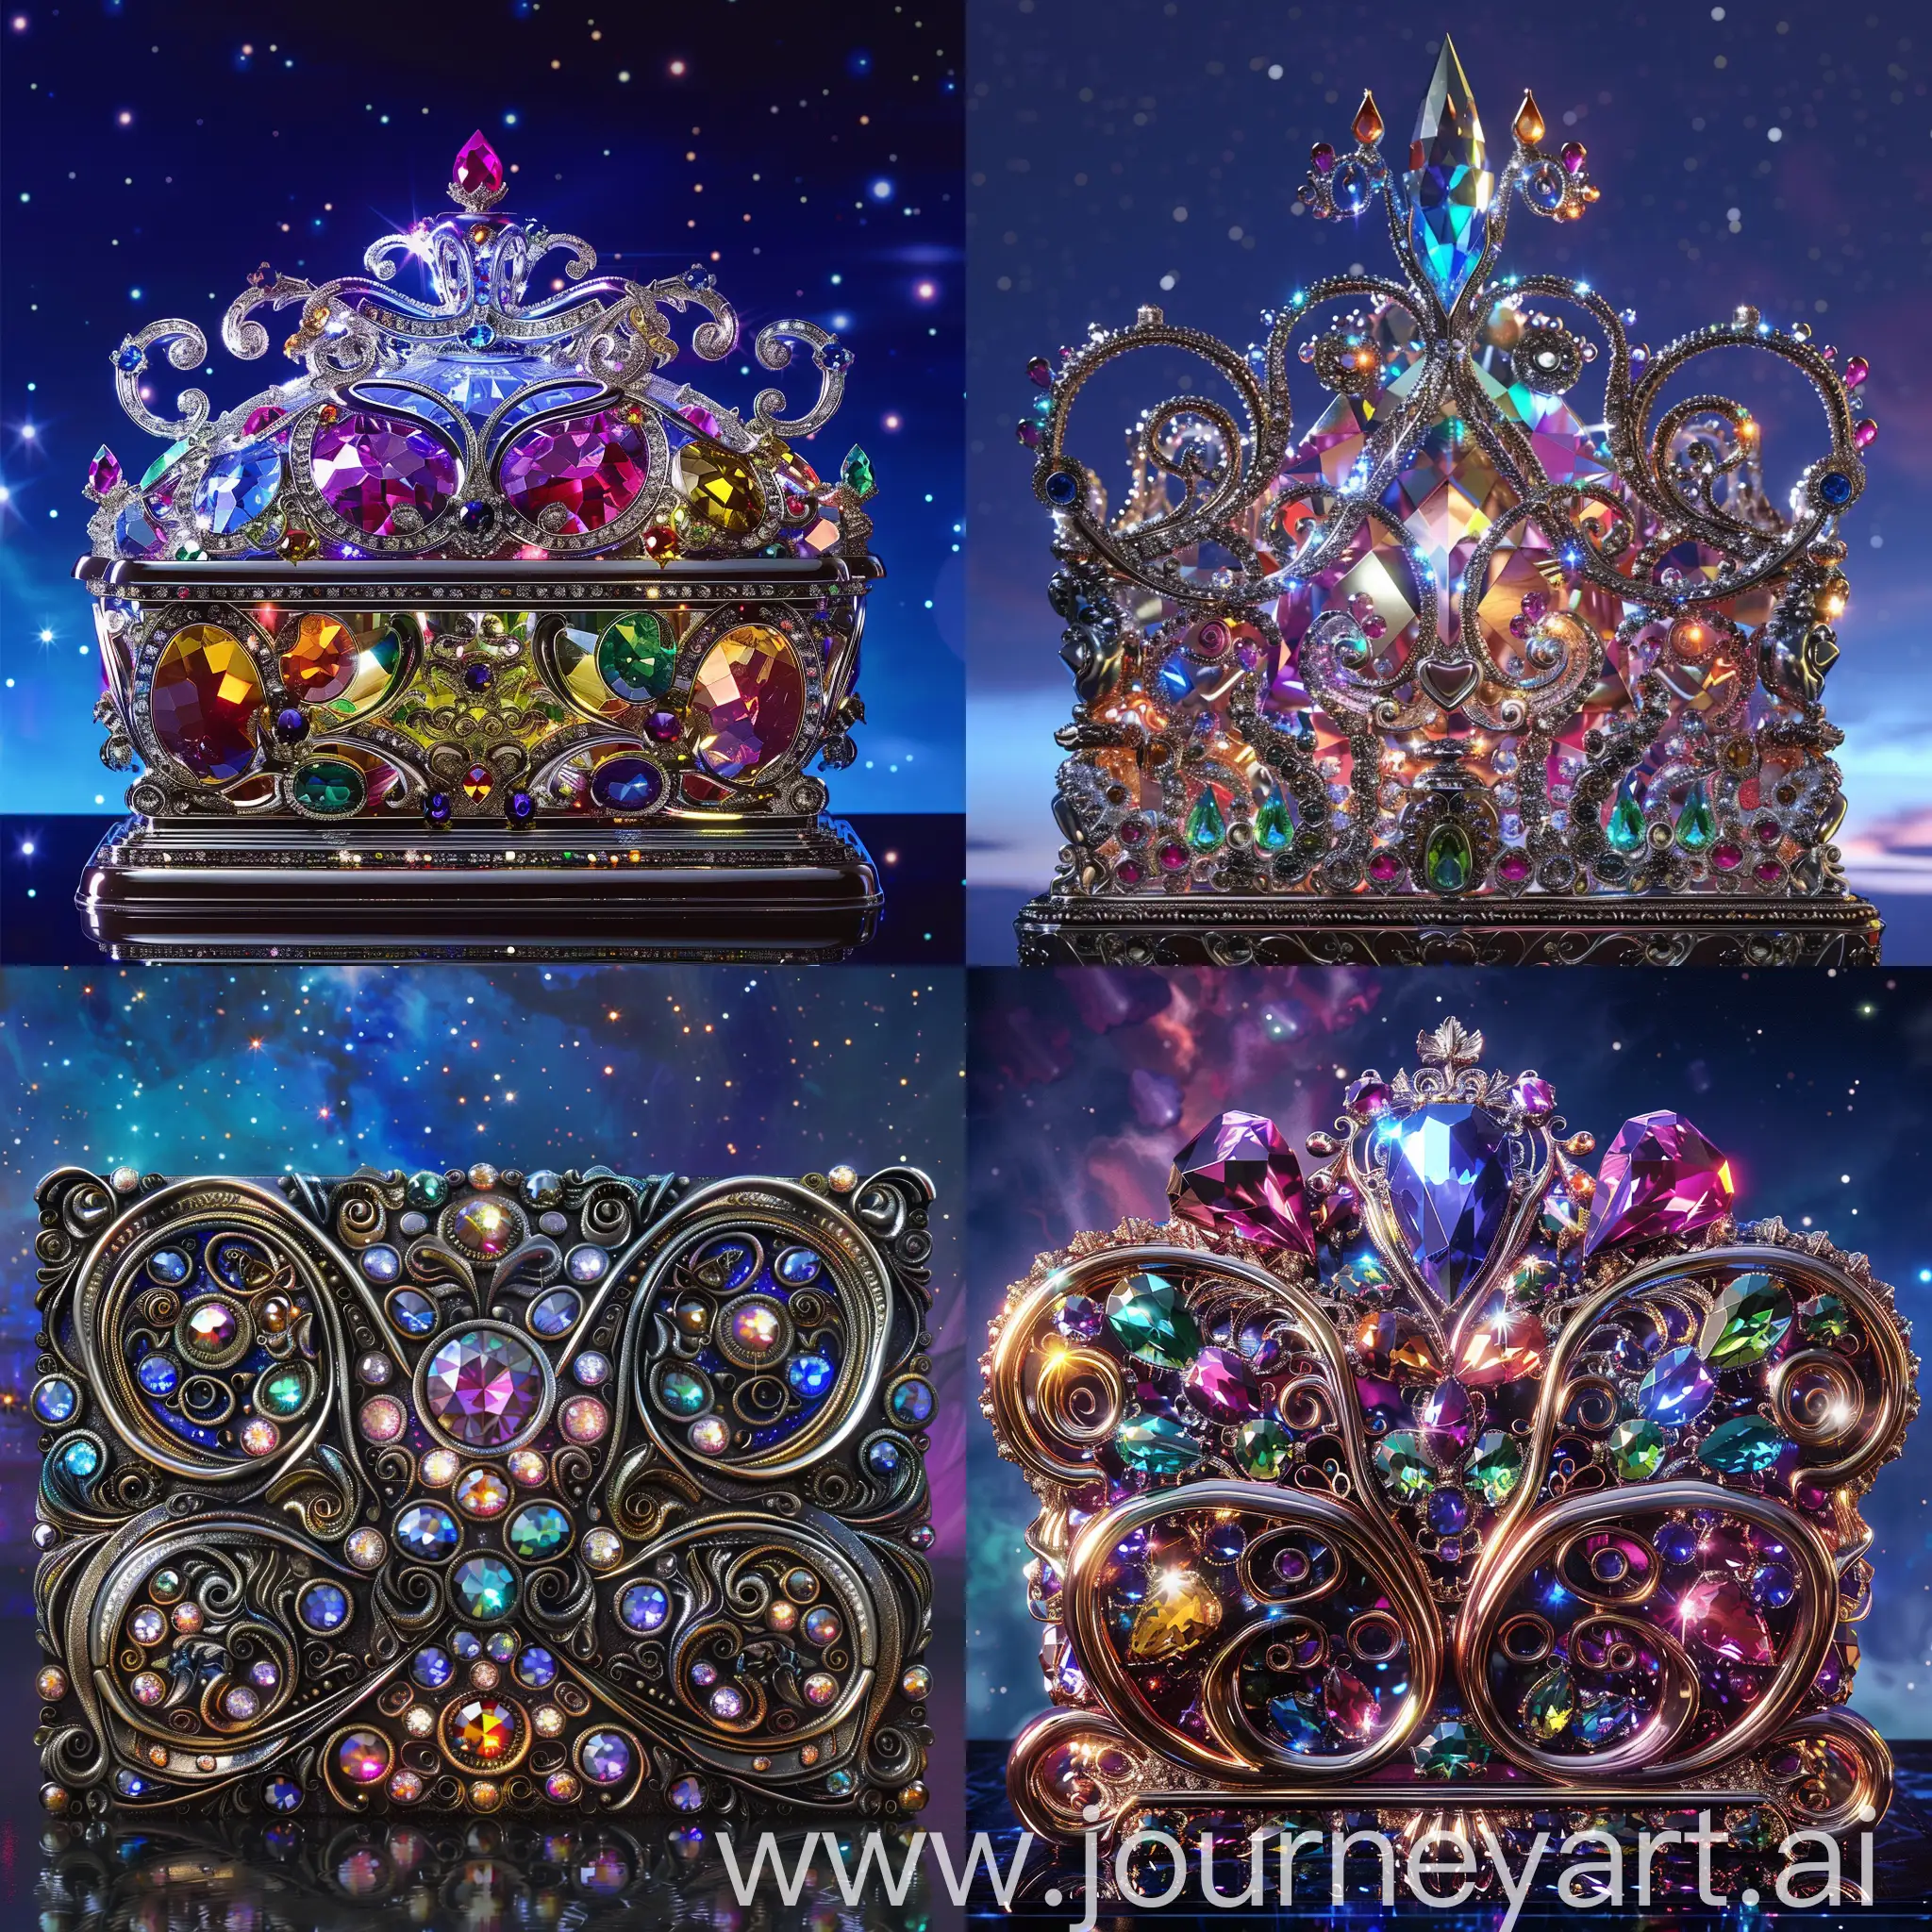 Magical-Crystal-Casket-with-Multicolored-Precious-Stones-against-Night-Sky